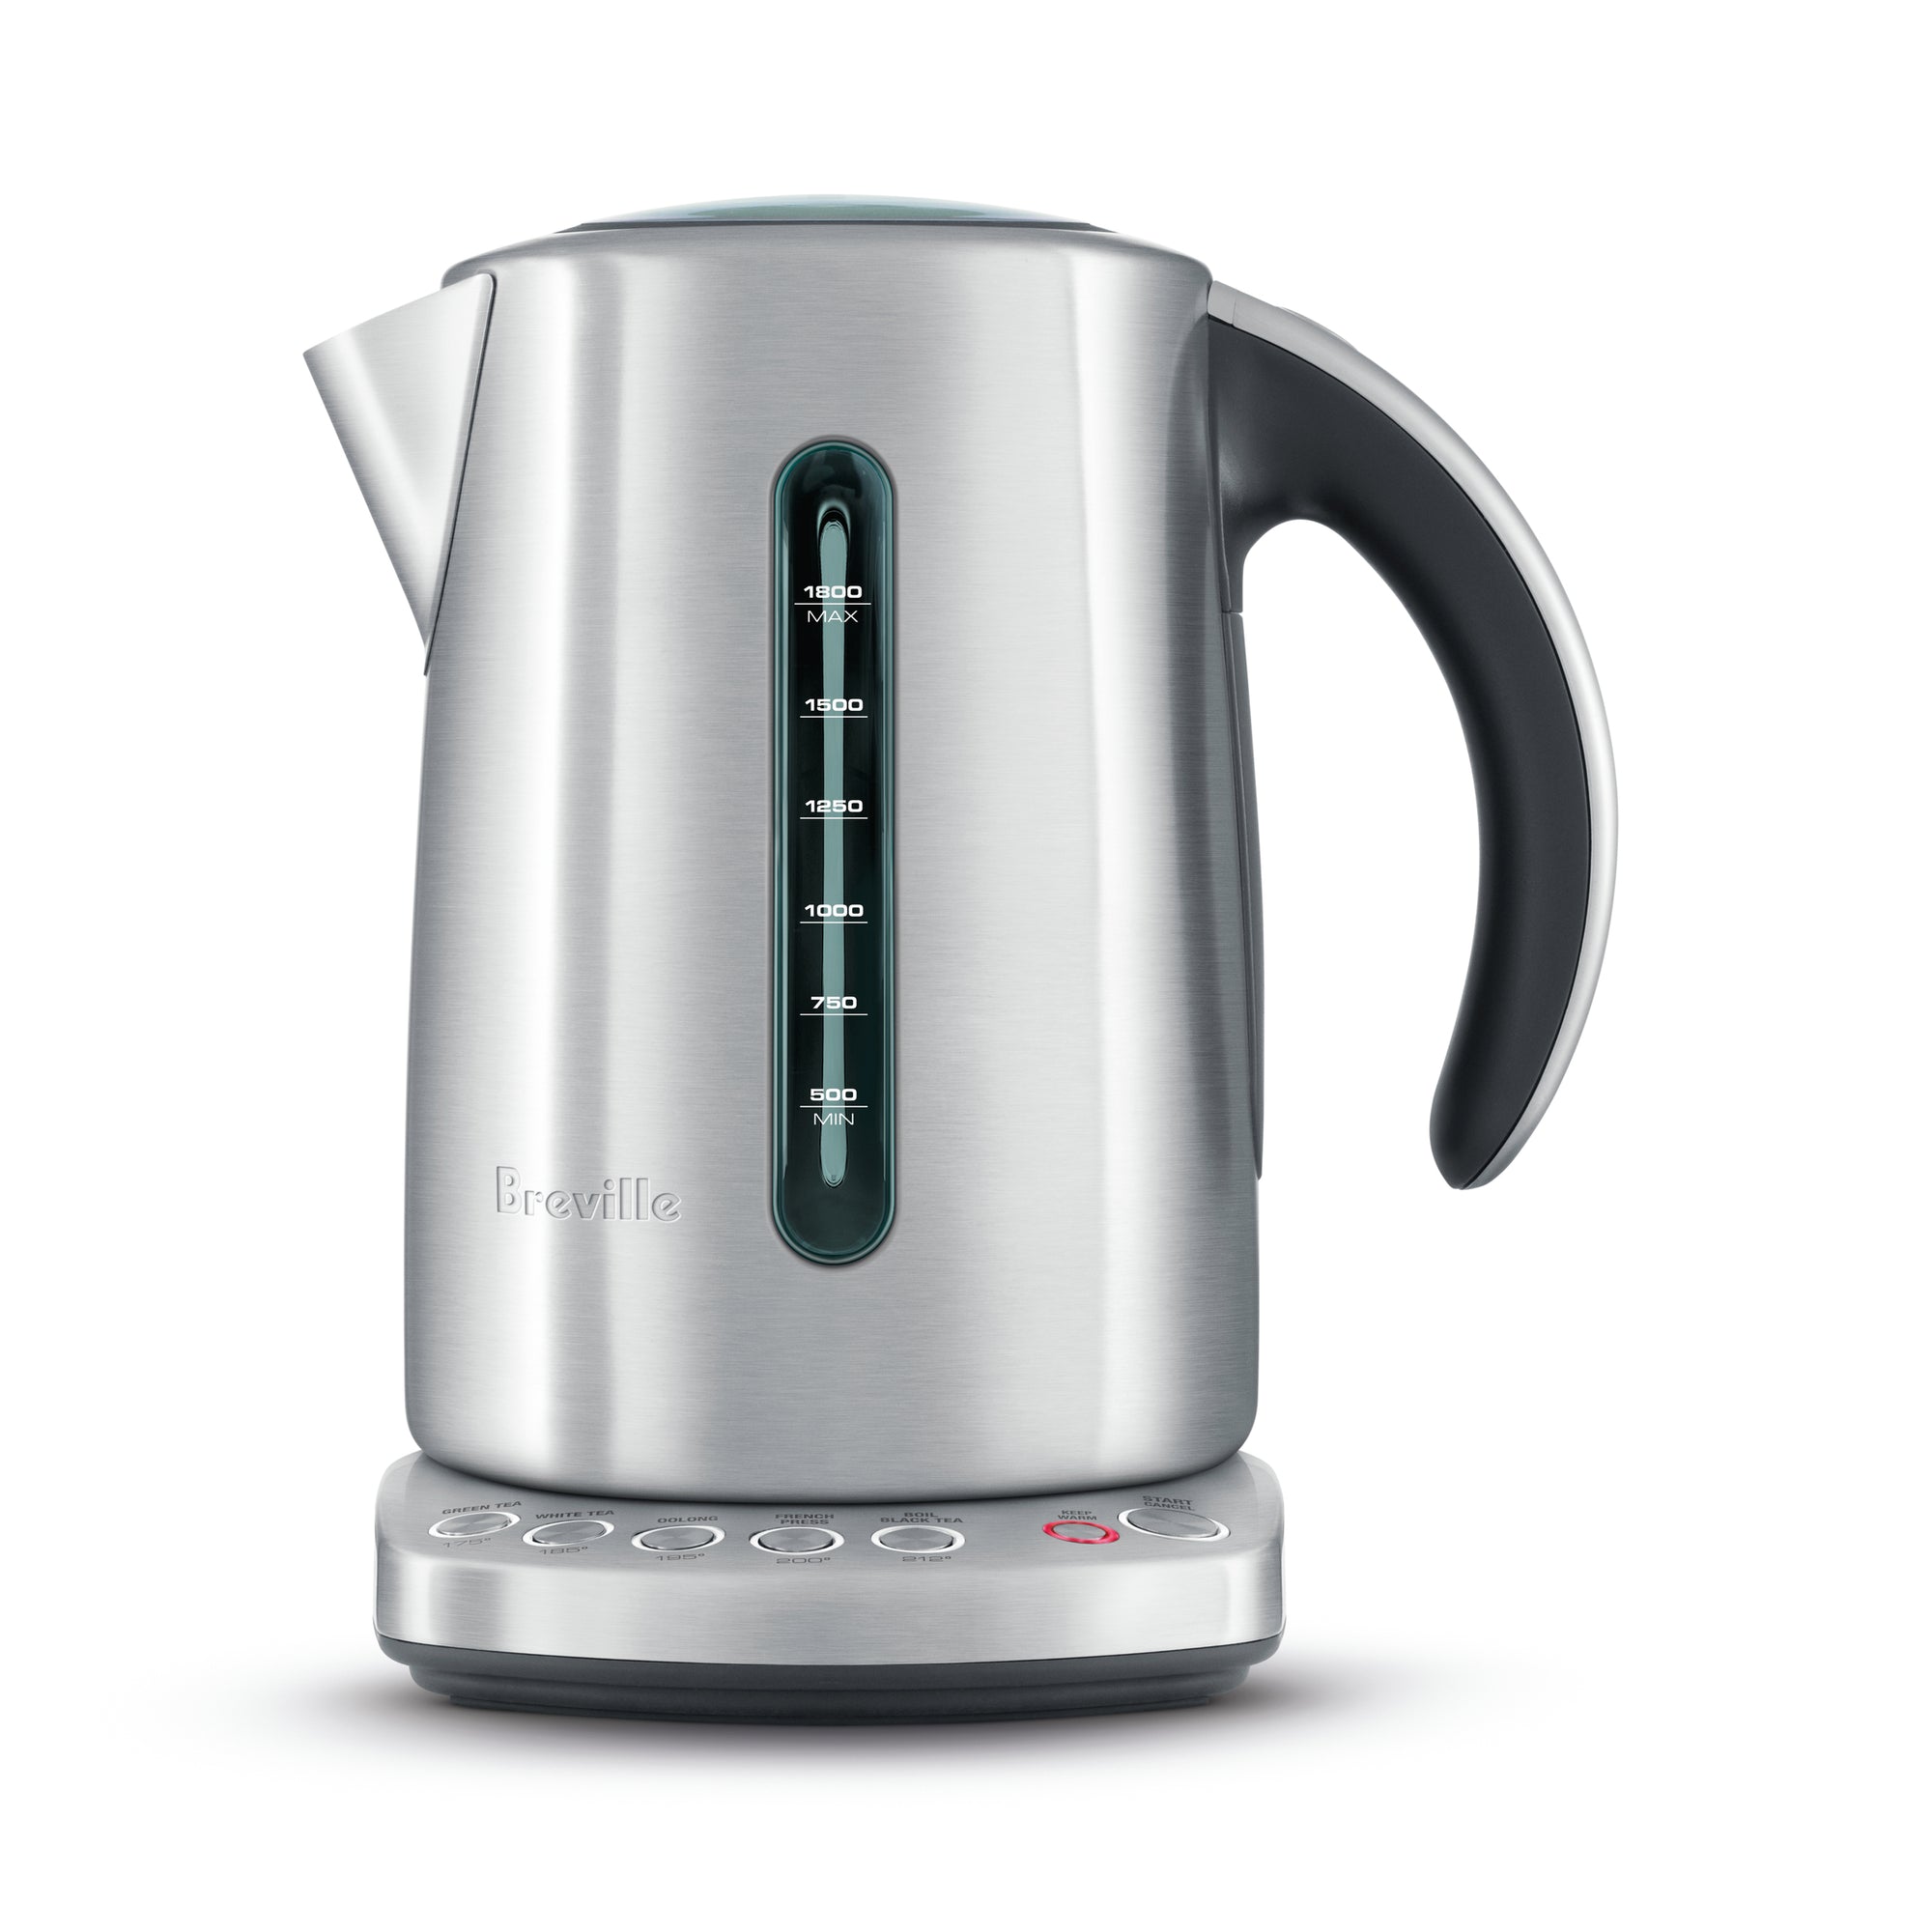 IQ Kettle with Temperature Control: End Bitter Tea